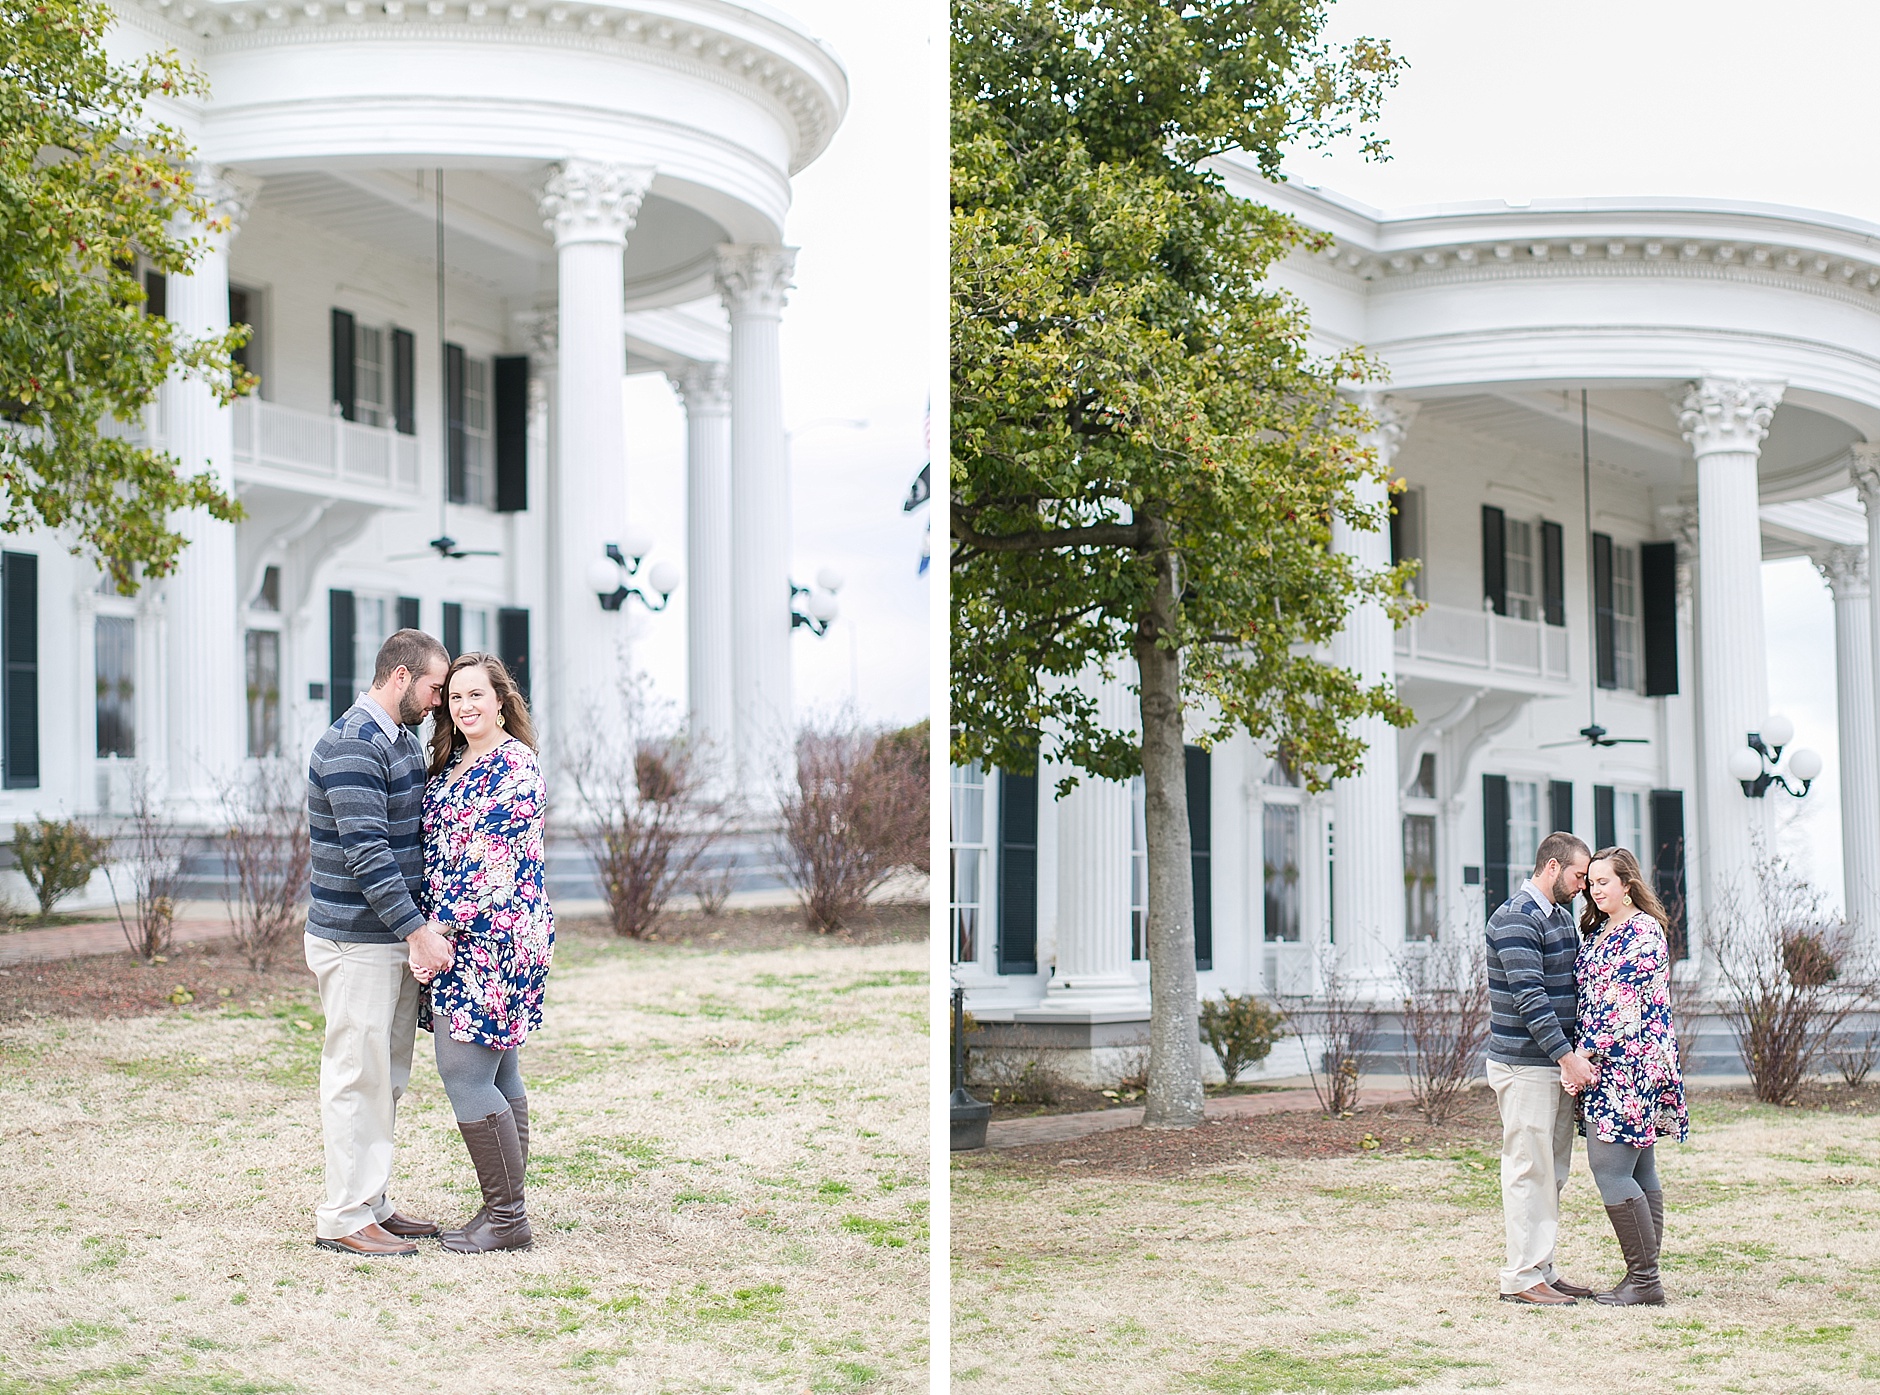 A Paducah Kentucky Engagament Session by Rachael Houser Photography